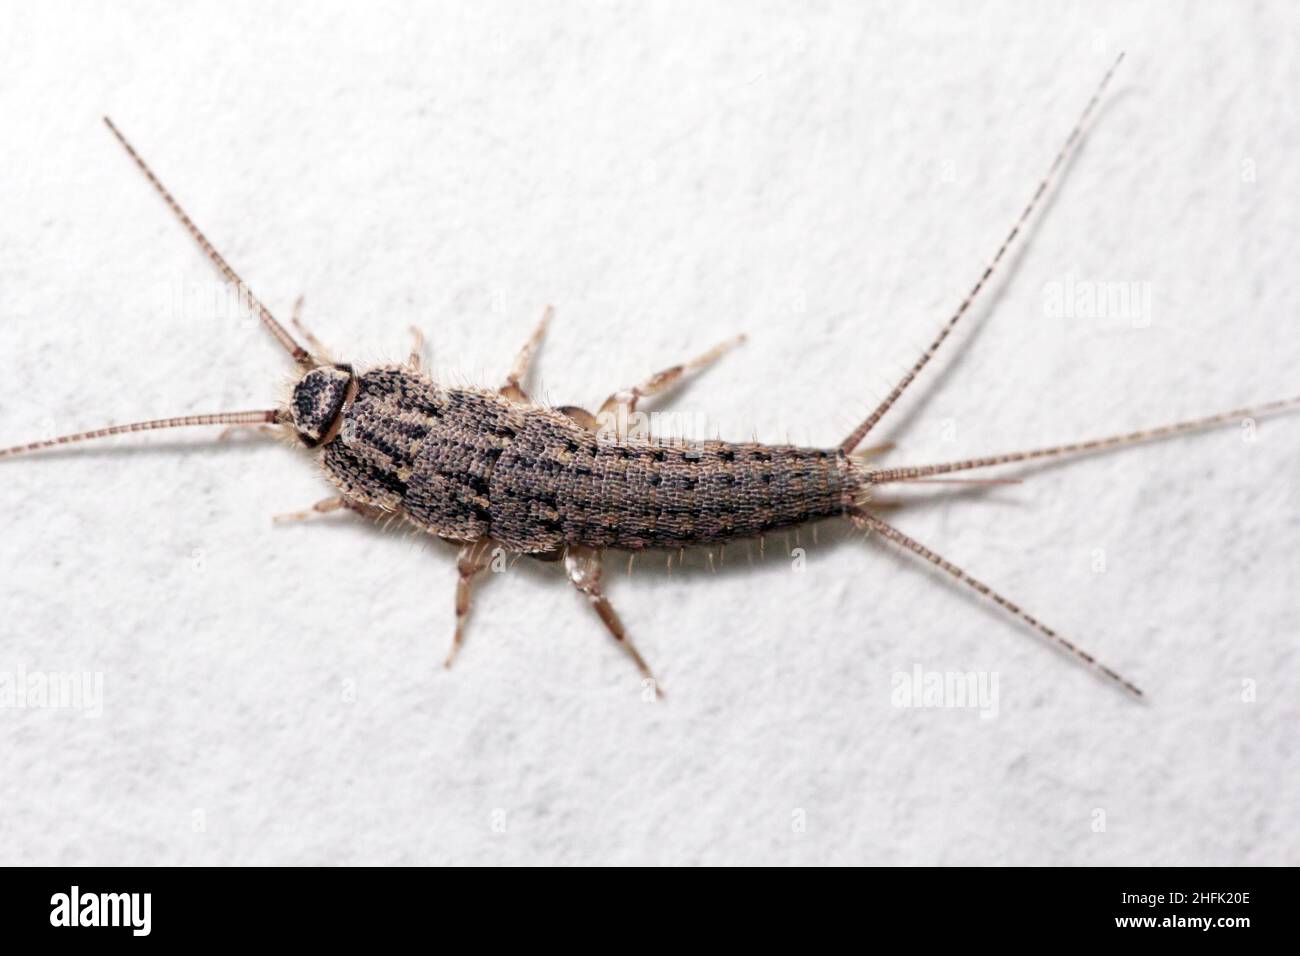 Banded silverfish - Thermobia domestica, lateral view, a common household pest. Stock Photo